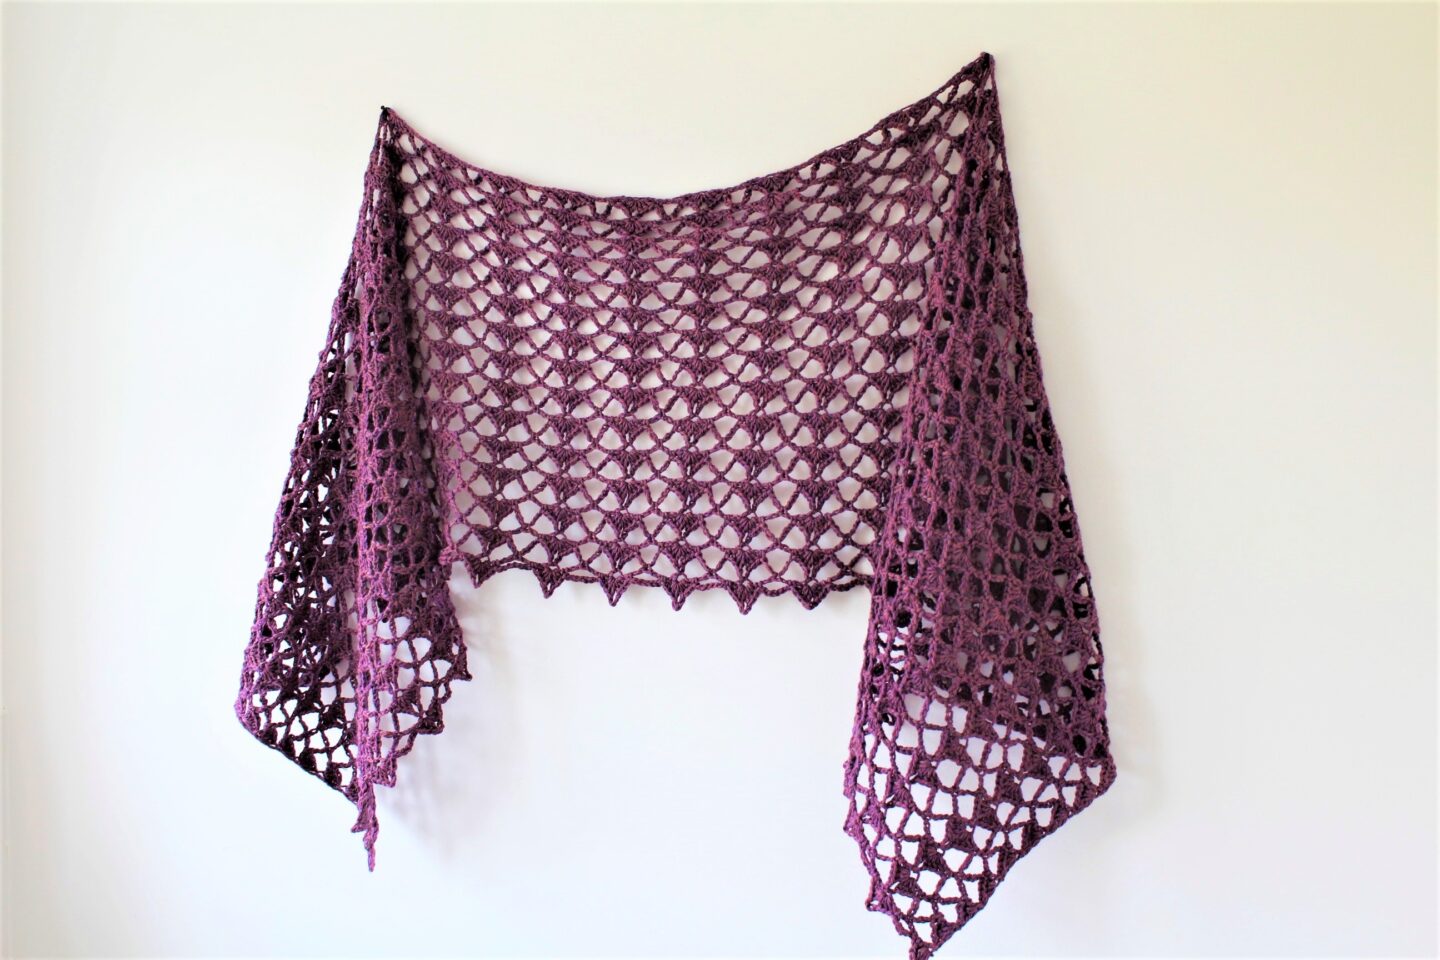 Free crochet shawl pattern with lace detail